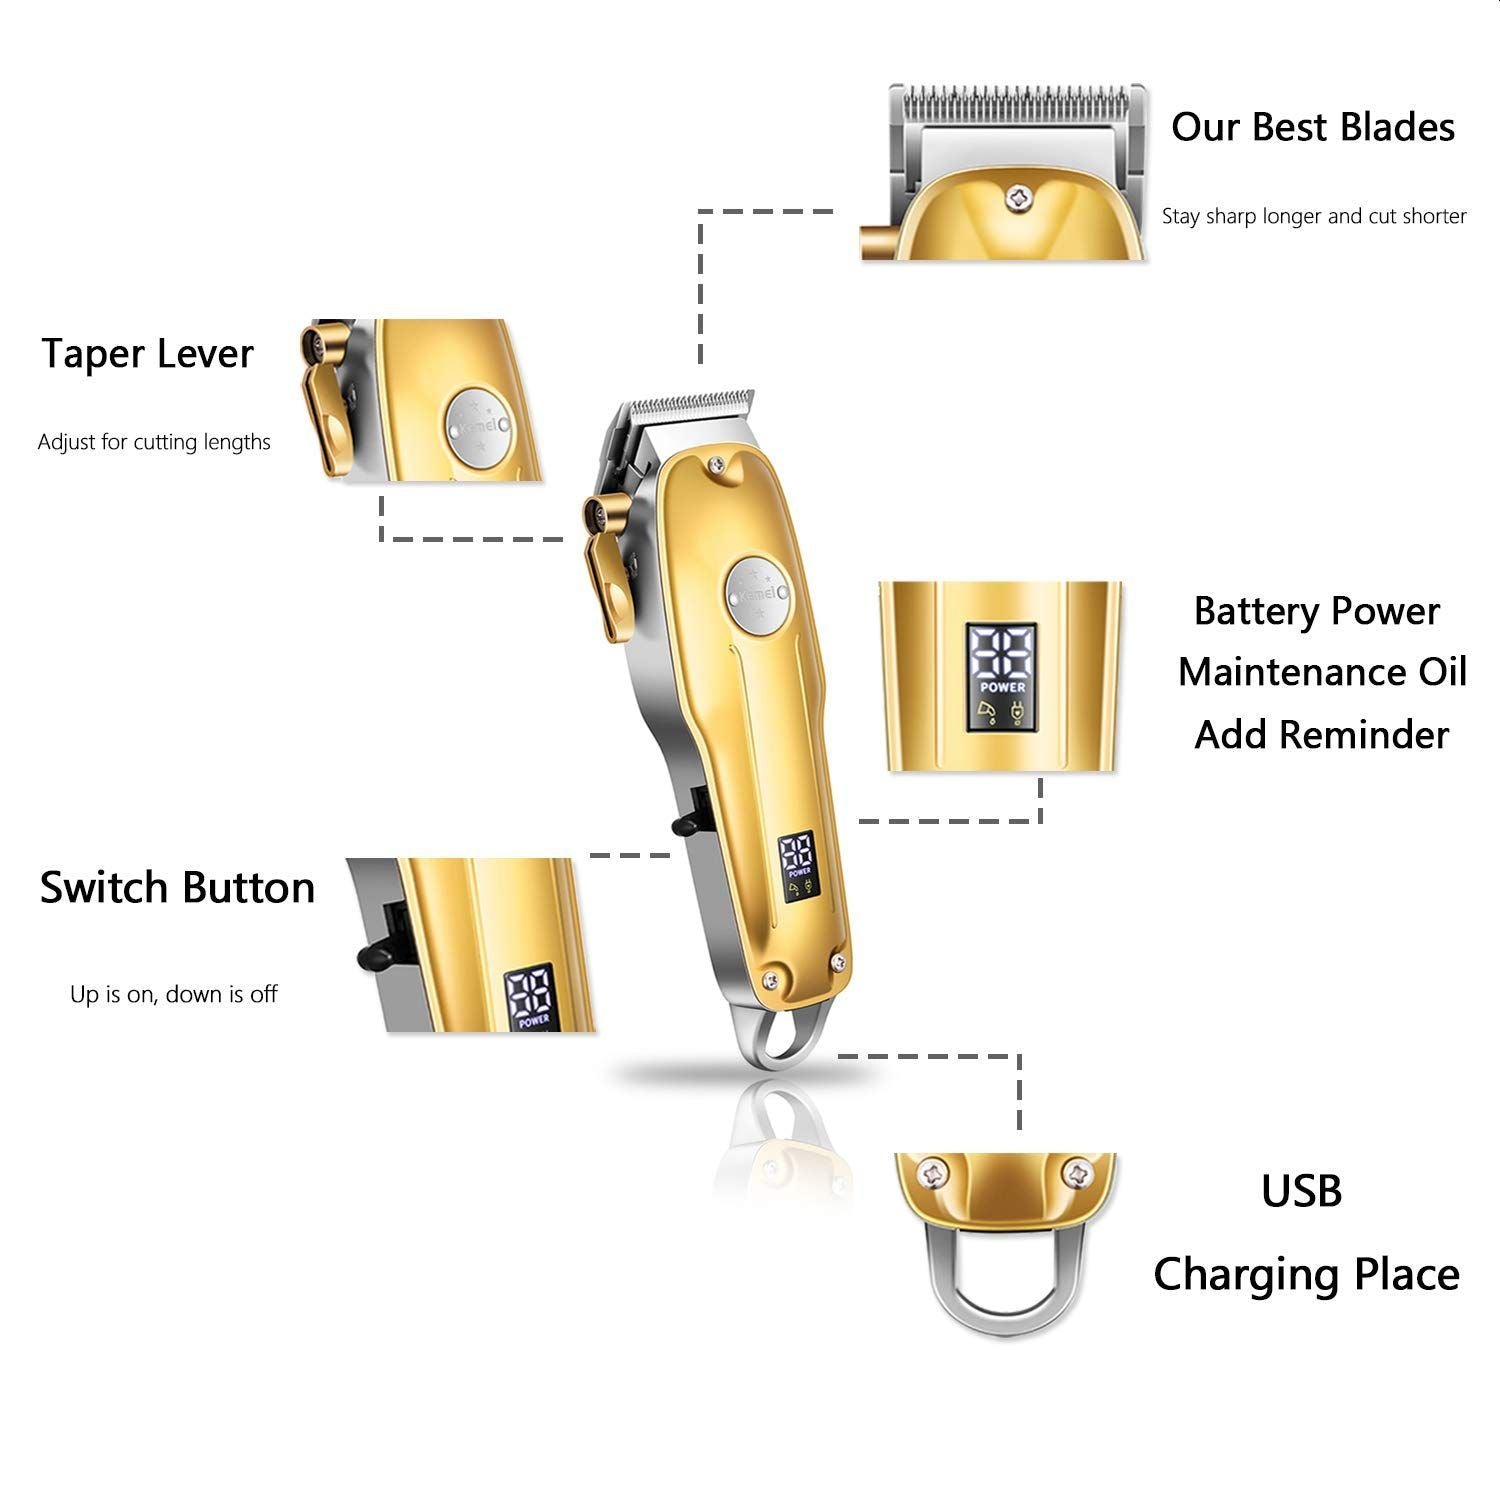 Kemei KM 1986 + PG Professional Cordless Hair Clipper | Trimmer 🔥 Gold Color,